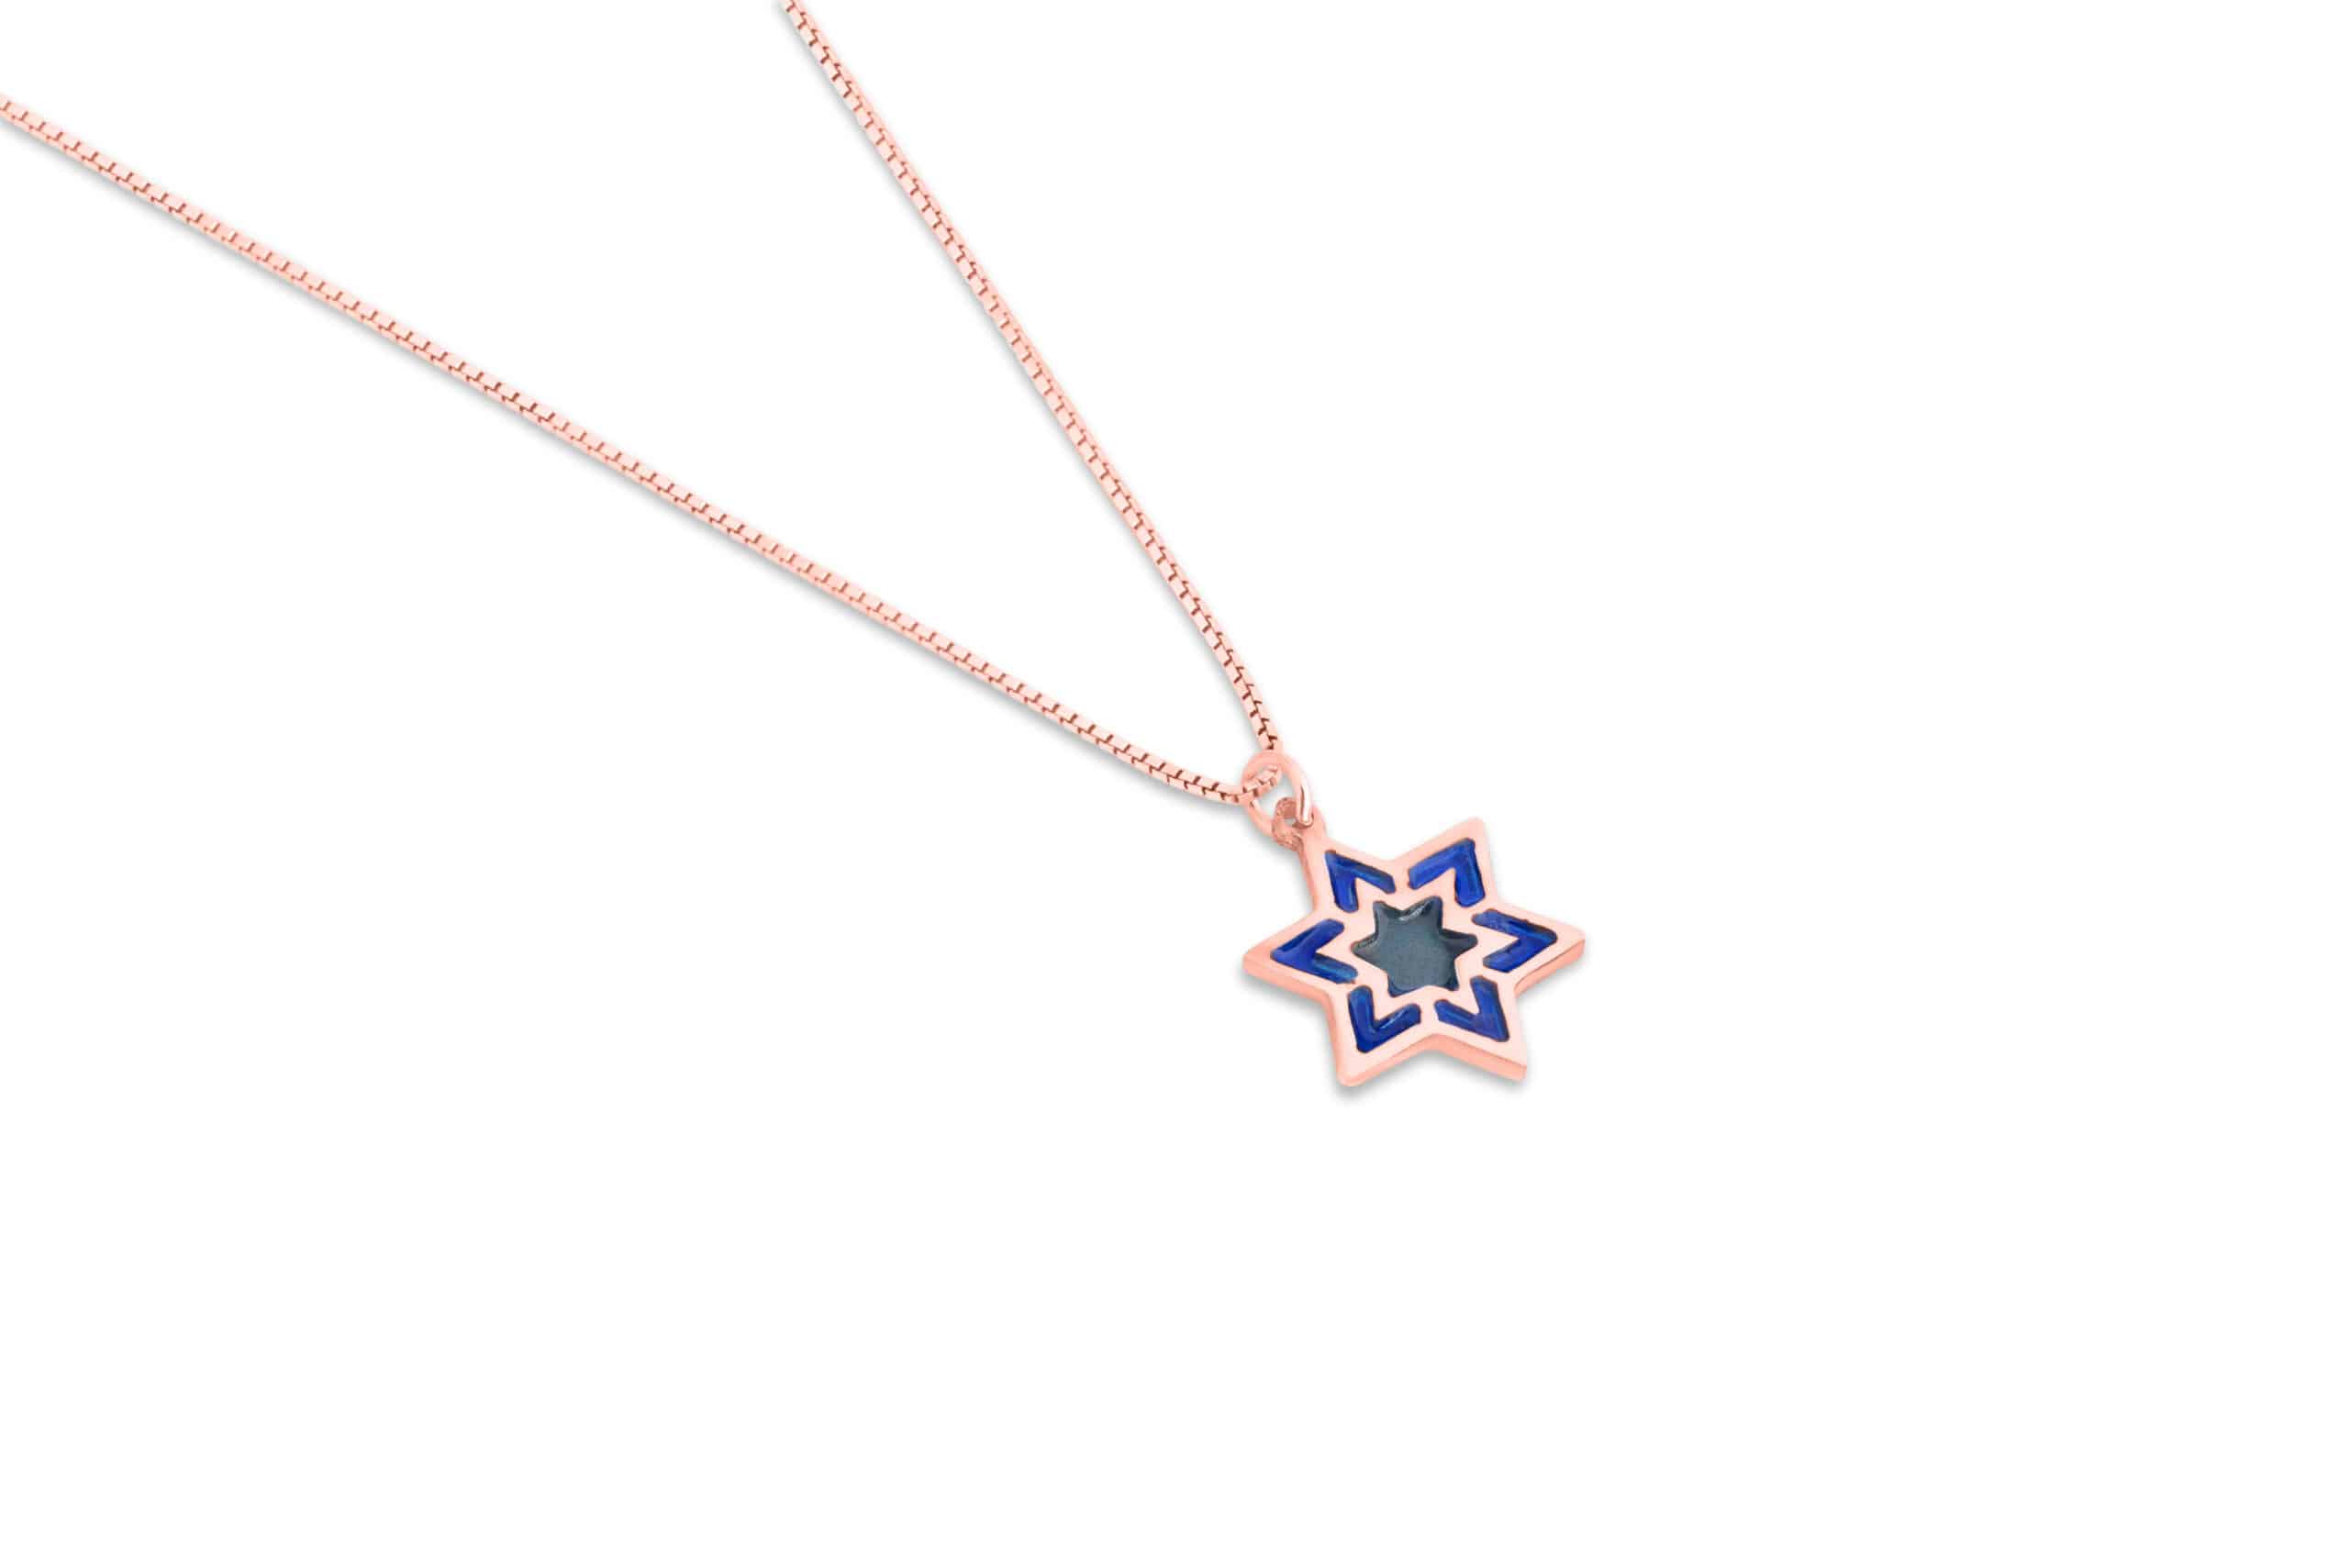 Small Magen David Necklace with Enamel